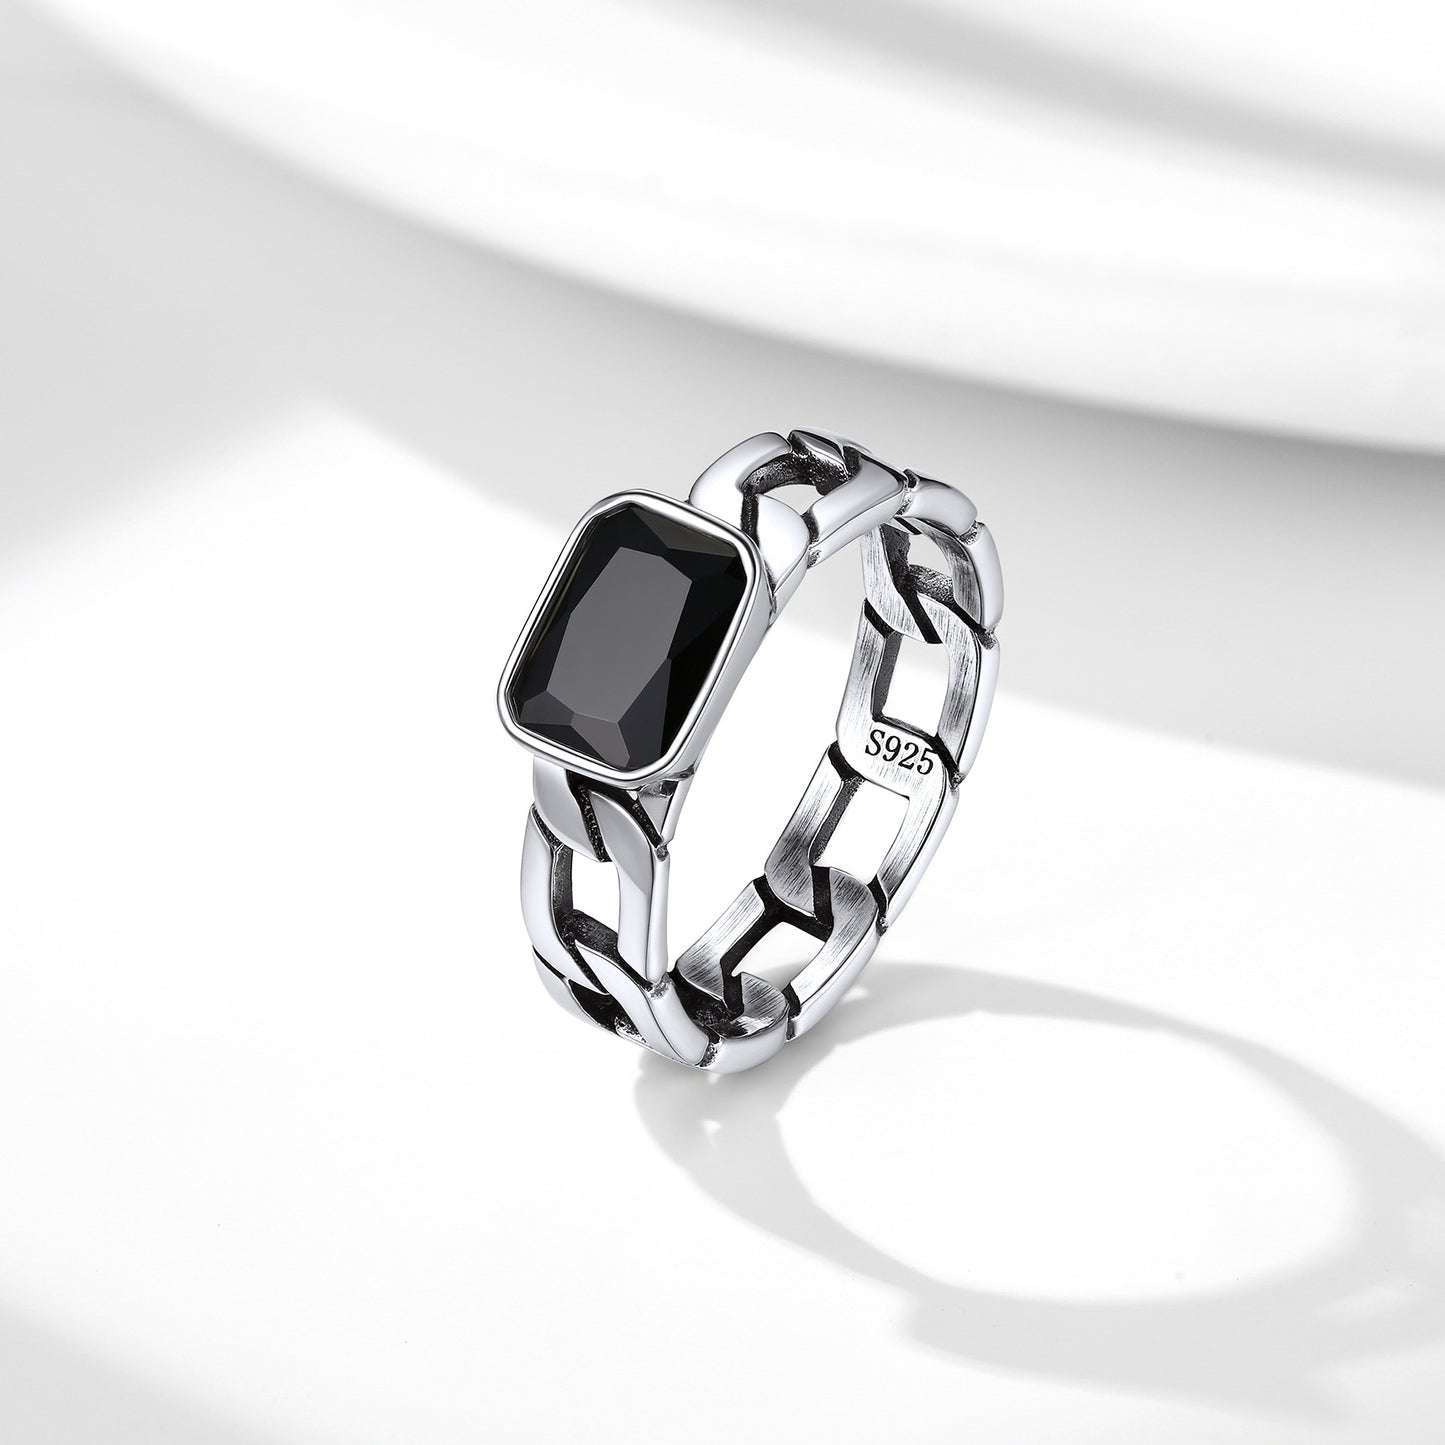 Vintage Silver Black Cubic Zirconia Chain Ring